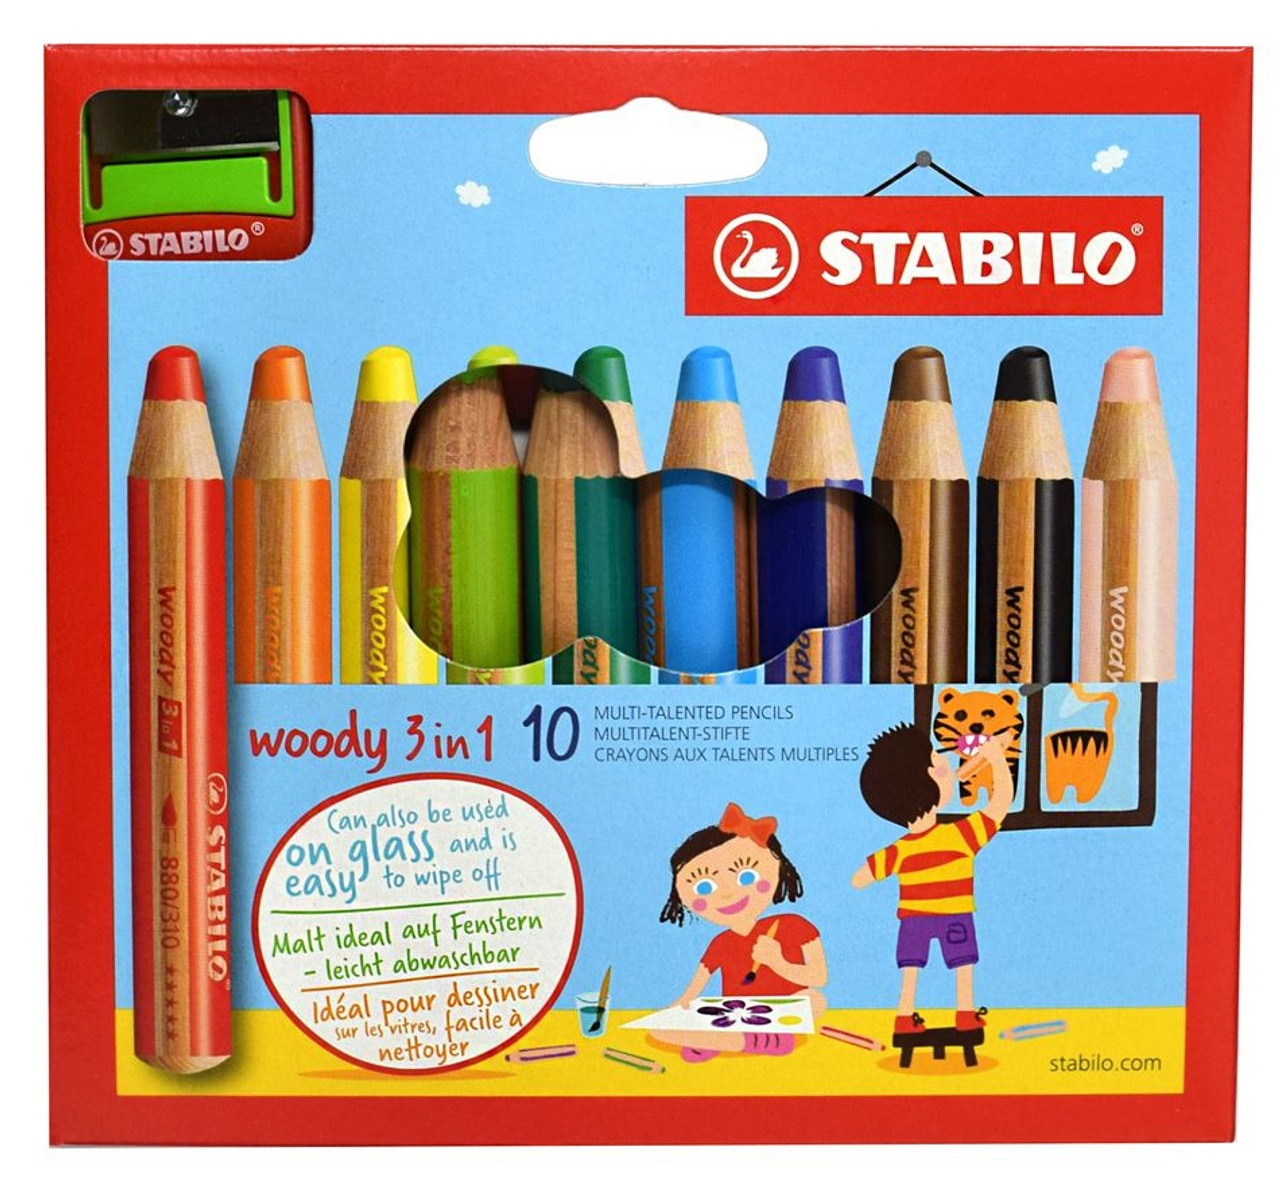 STABILO Woody 3 in 1 Multi Talent Pencil Crayon - Brown (Pack of 5)